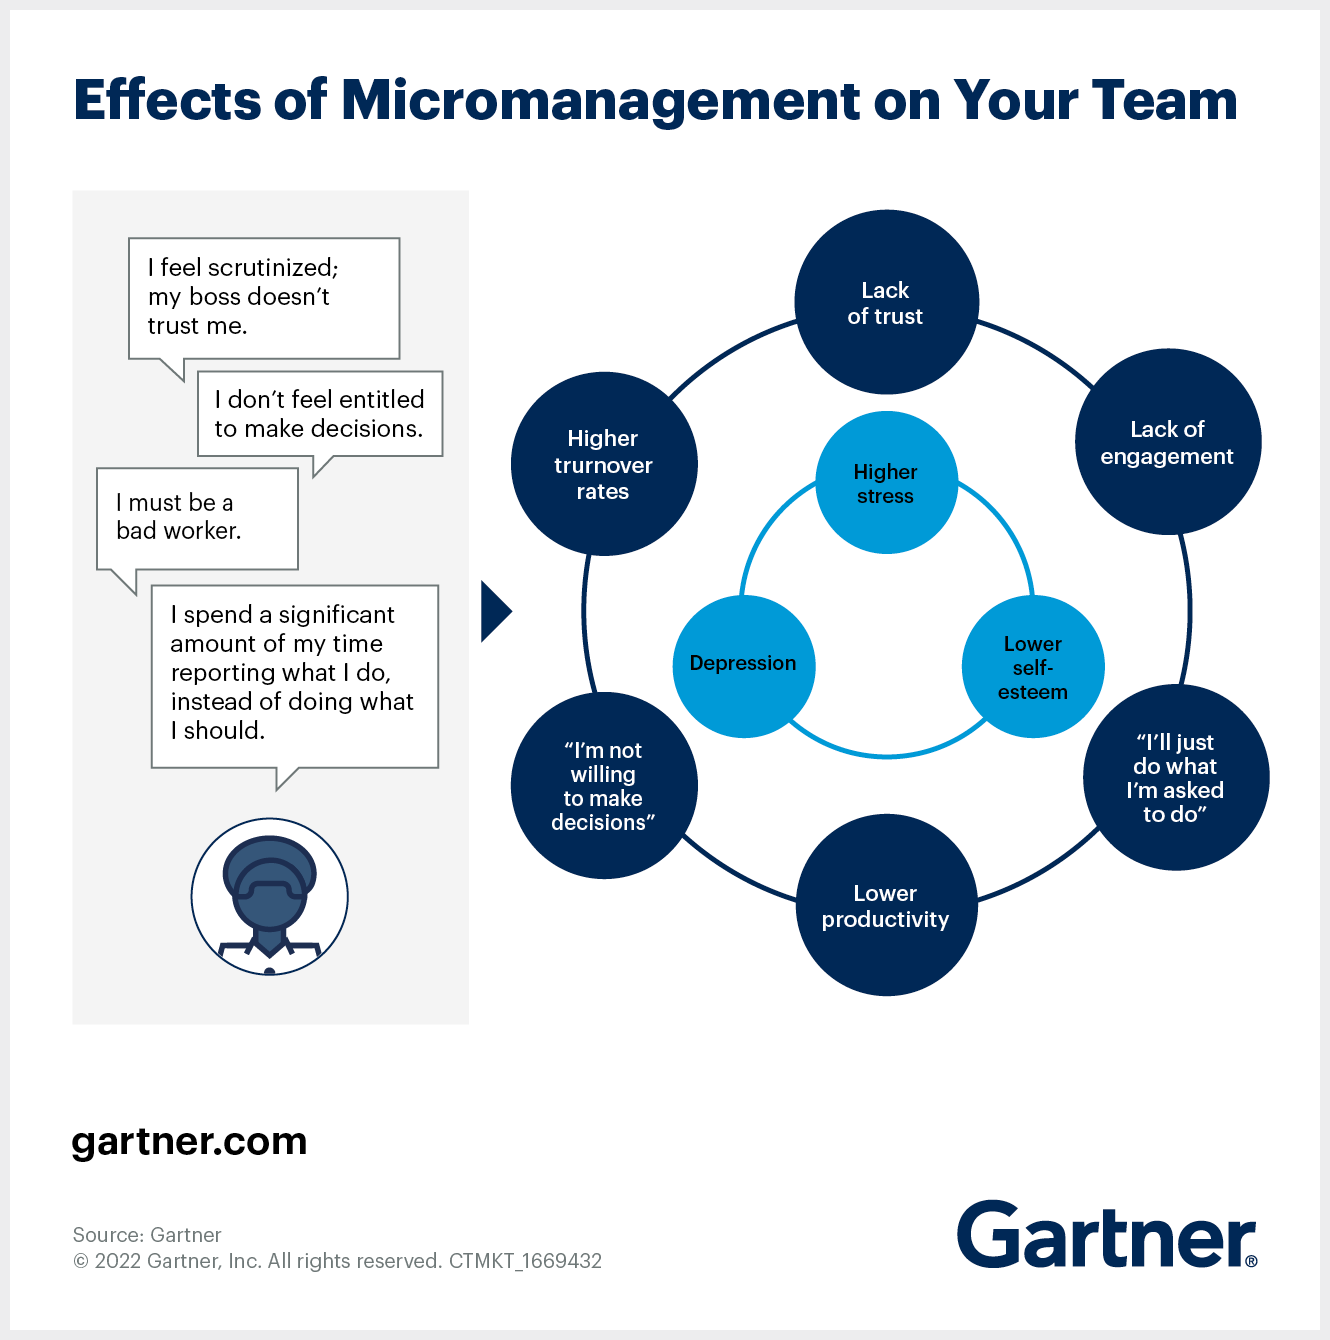 See the ways in which micromanagement stresses out your employees and makes them less productive.